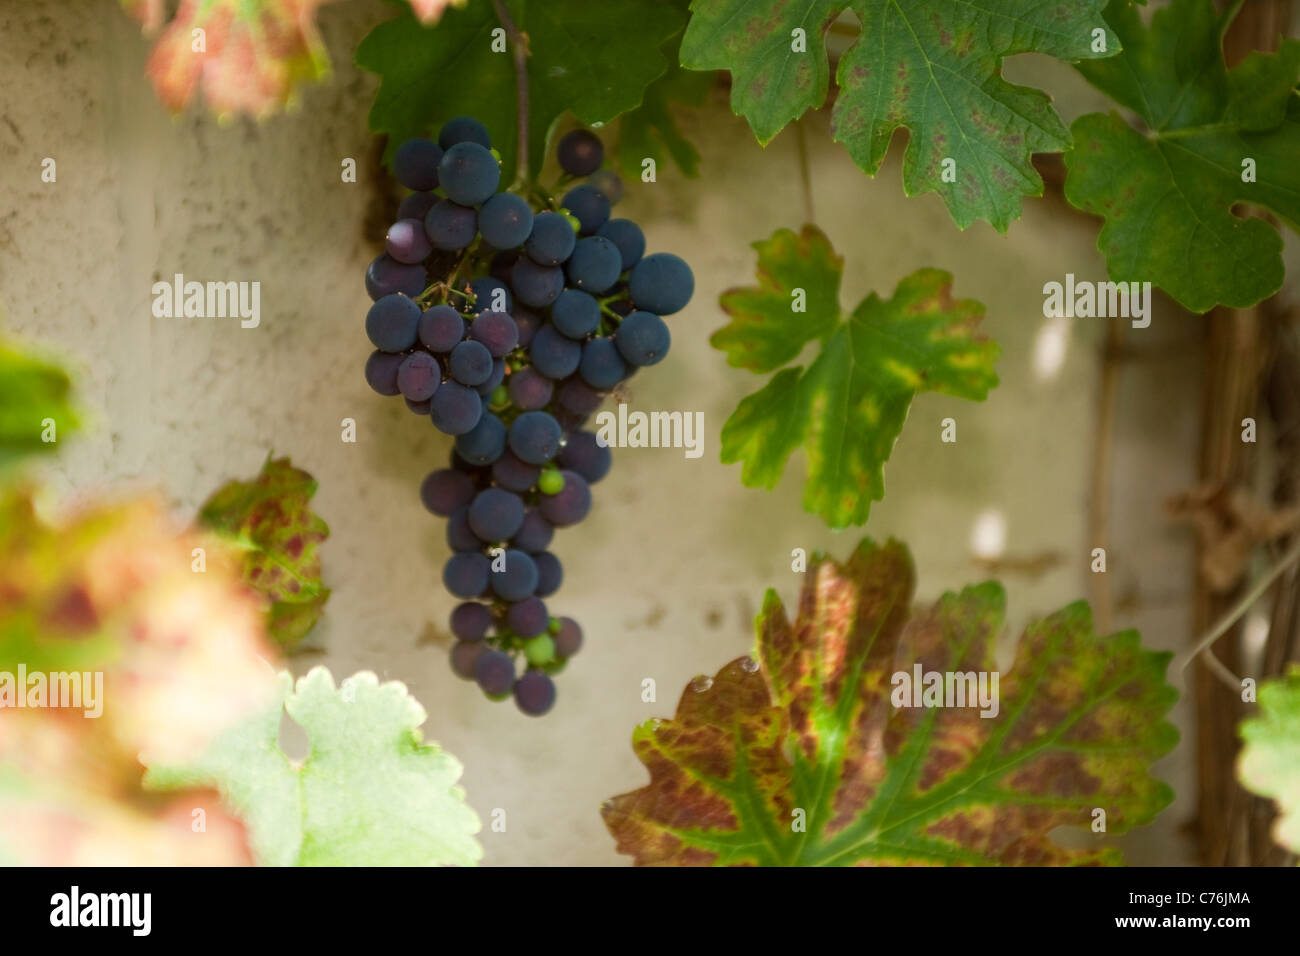 Grapes growing on vine in English garden Stock Photo